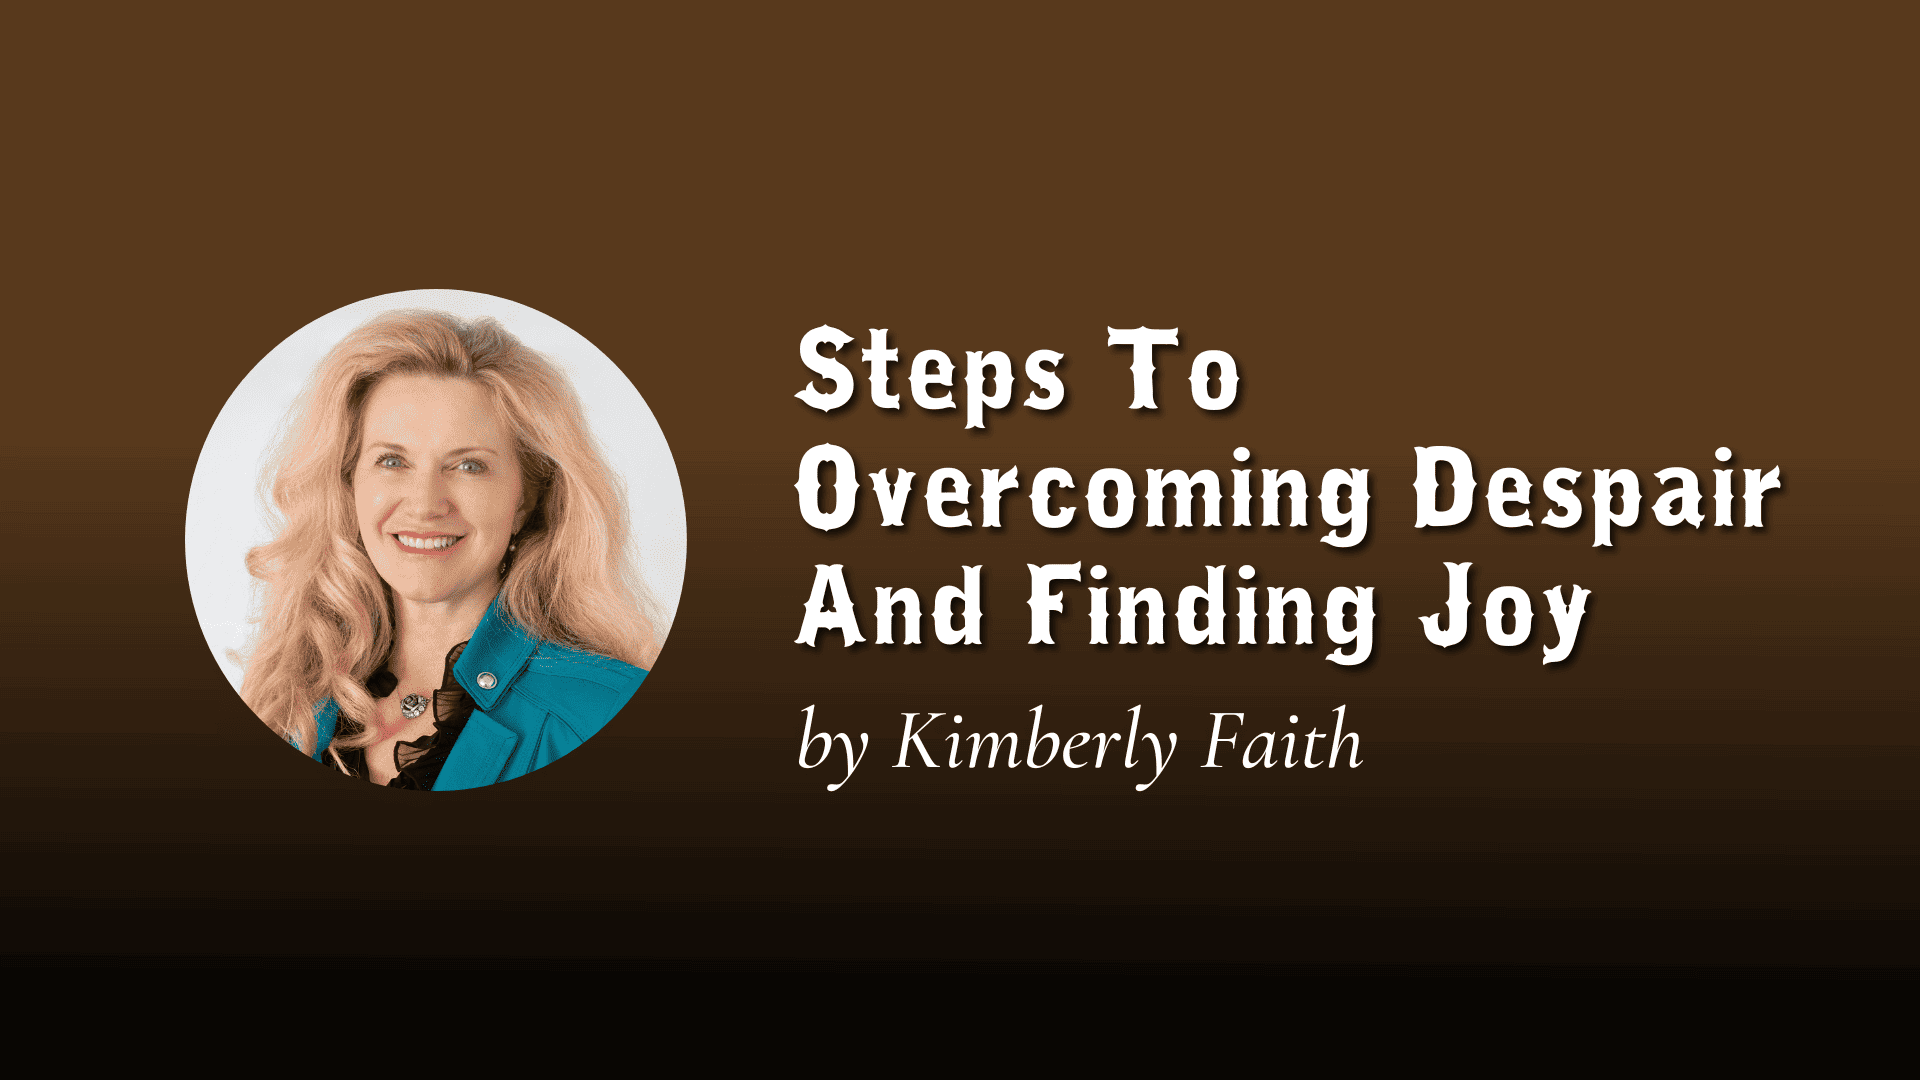 Steps To Overcoming Despair And Finding Joy